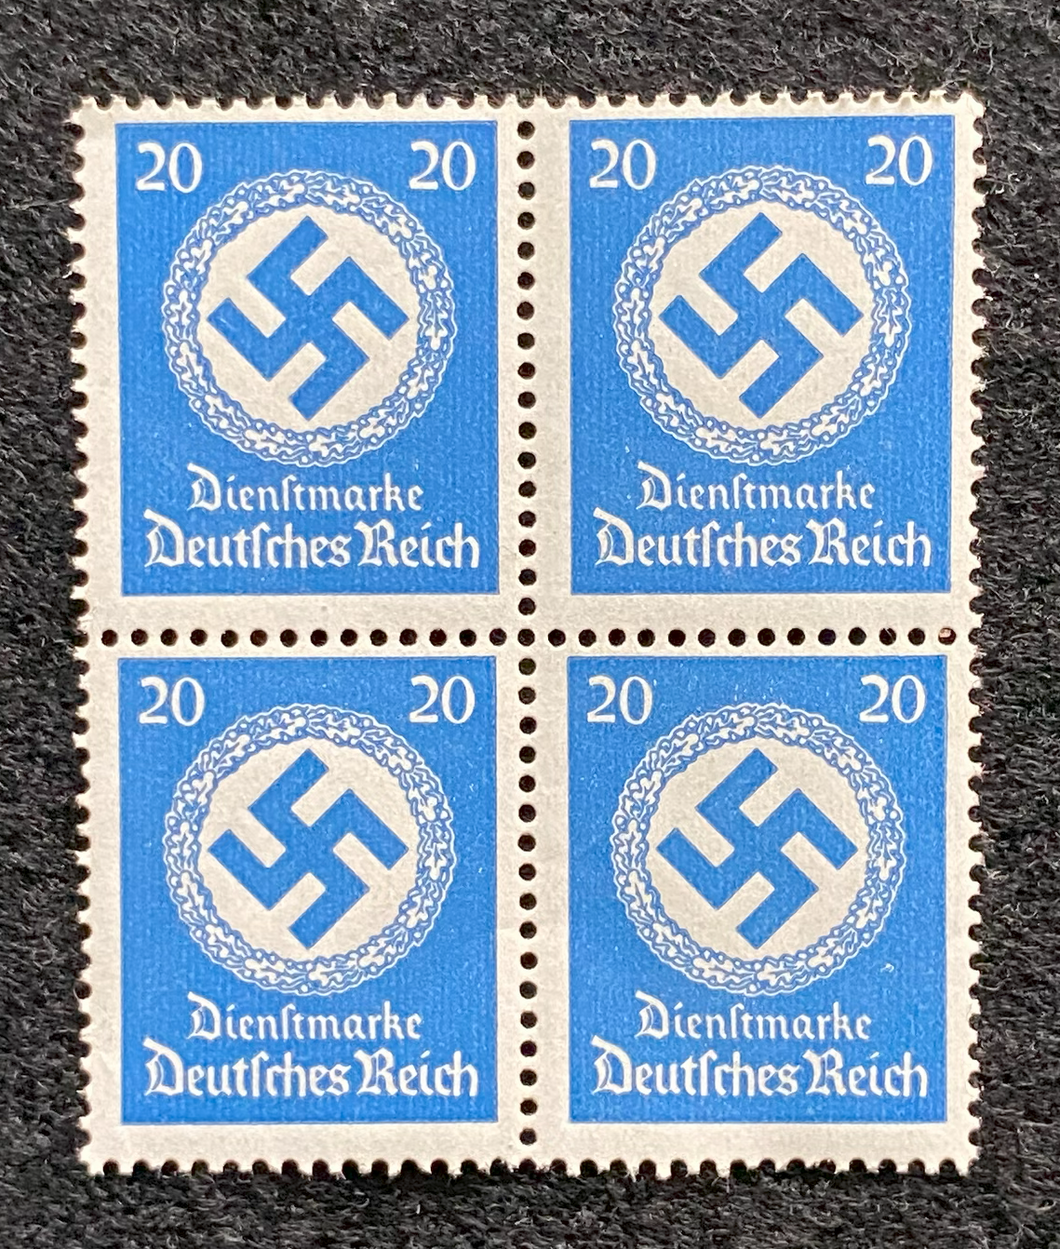 Antique WWII German Nazi Third Reich 20 Rp Stamp with SWASTIKA MNH Block of 4